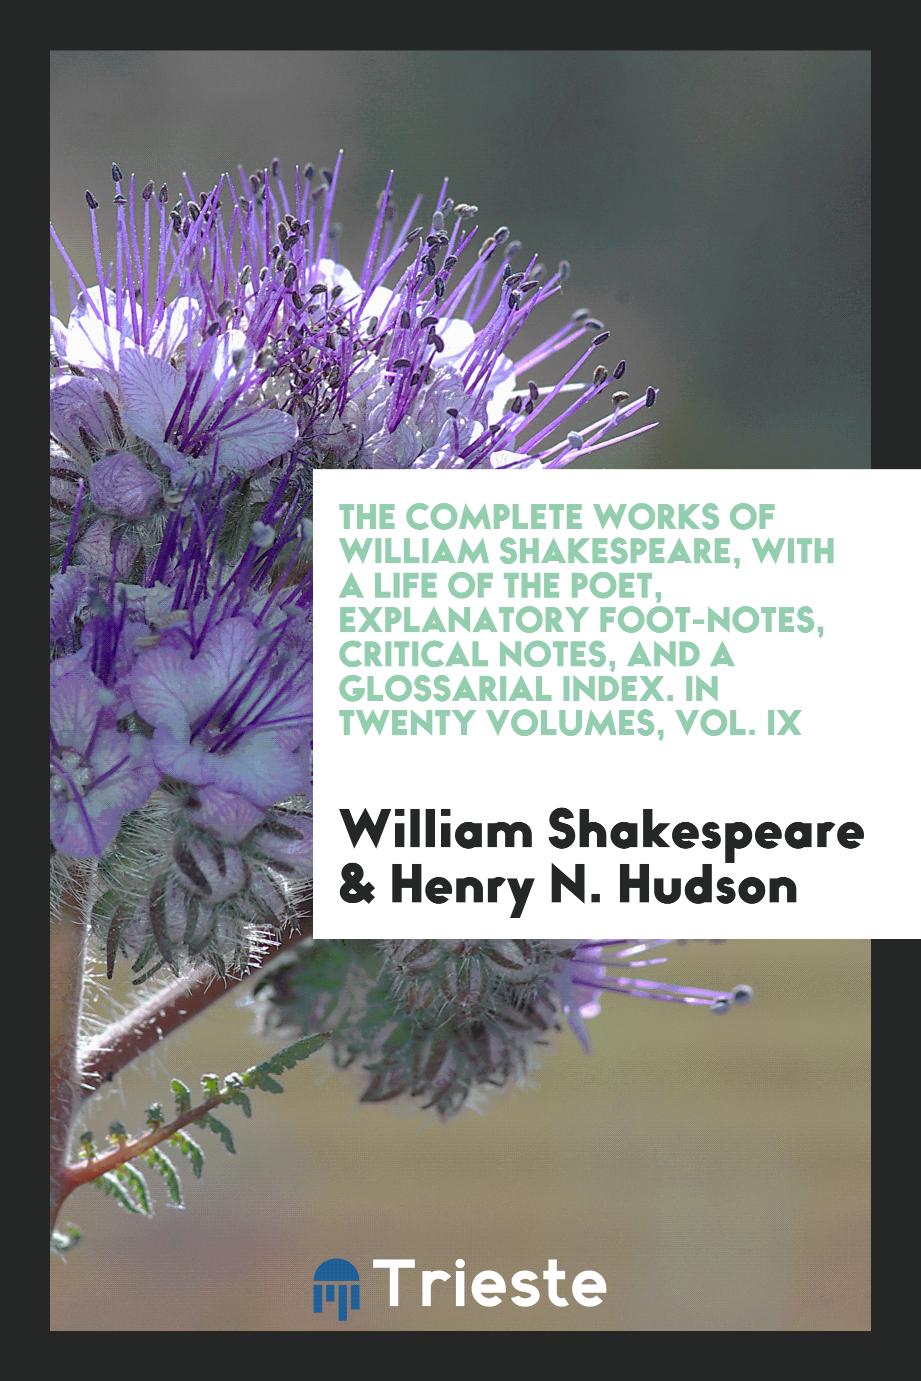 The Complete Works of William Shakespeare, with a Life of the Poet, Explanatory Foot-Notes, Critical Notes, and a Glossarial Index. In Twenty Volumes, Vol. IX